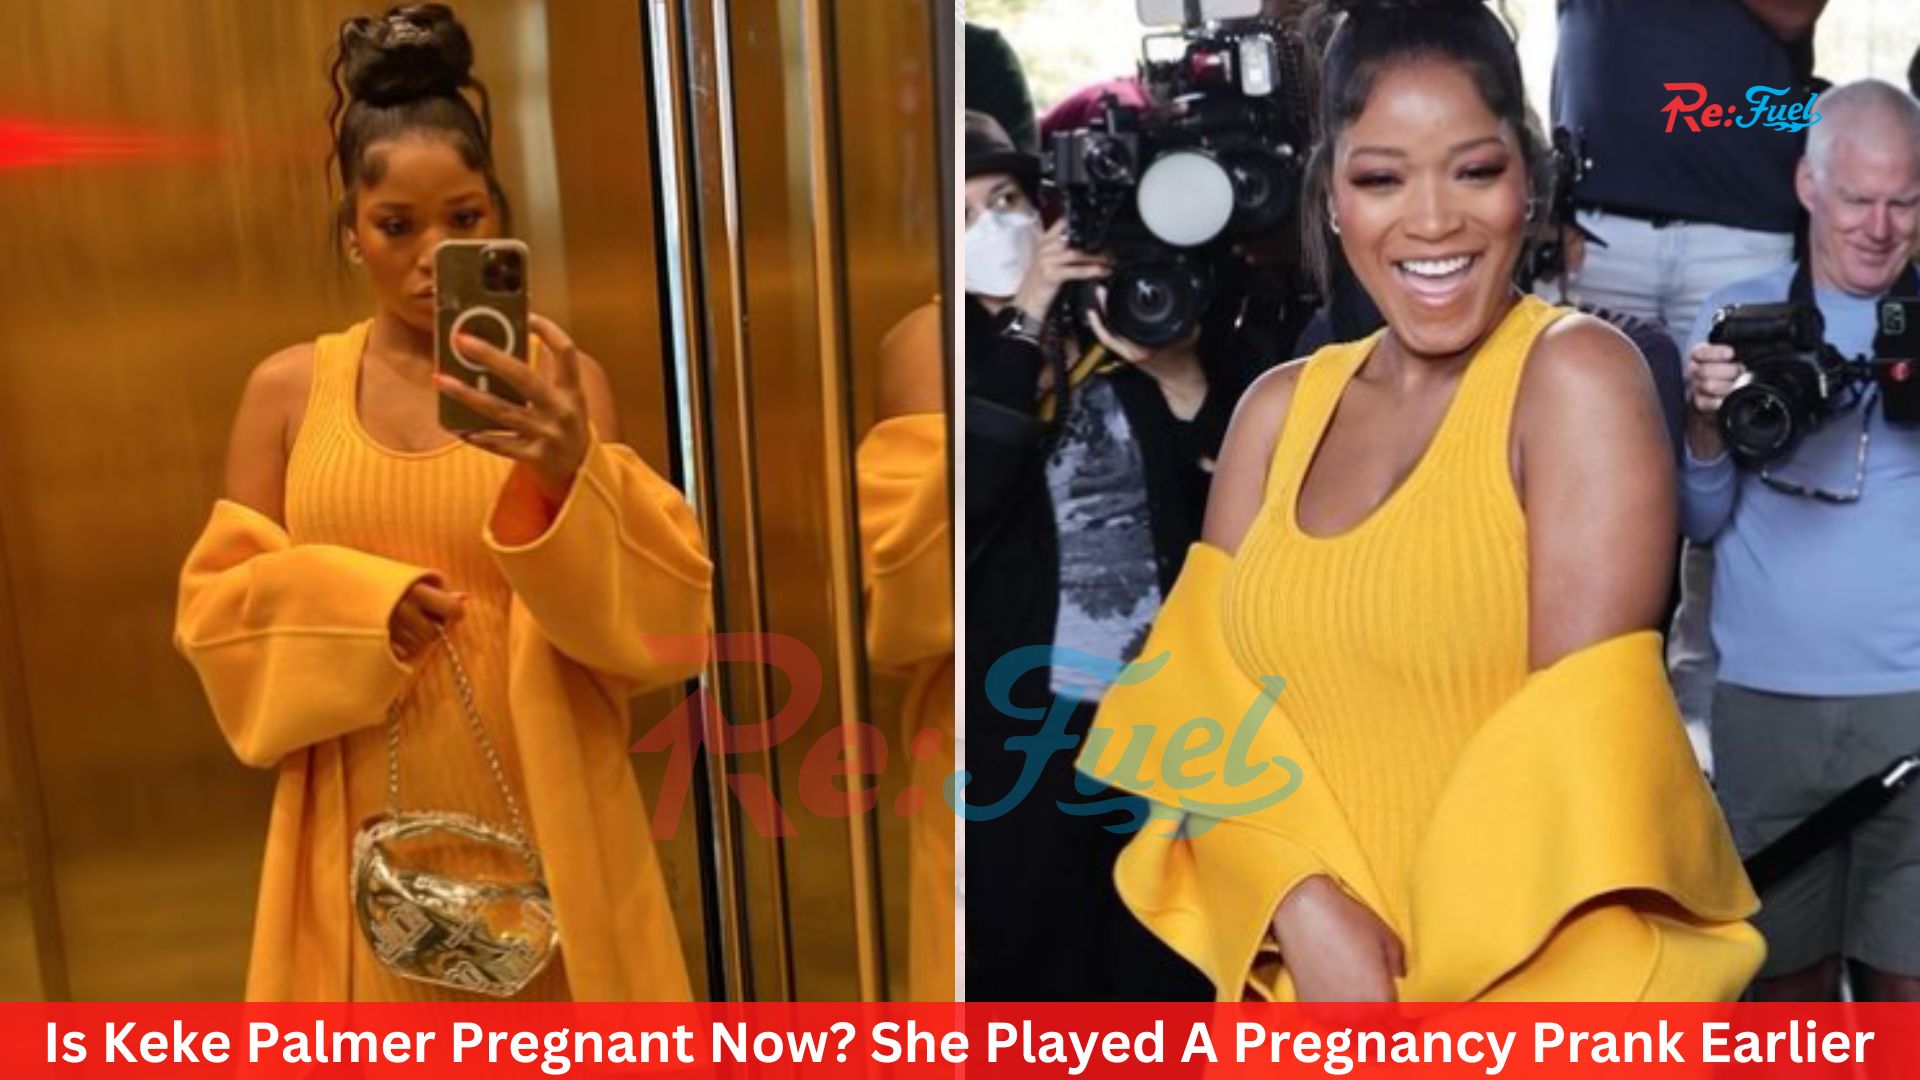 Is Keke Palmer Pregnant Now? She Played A Pregnancy Prank Earlier